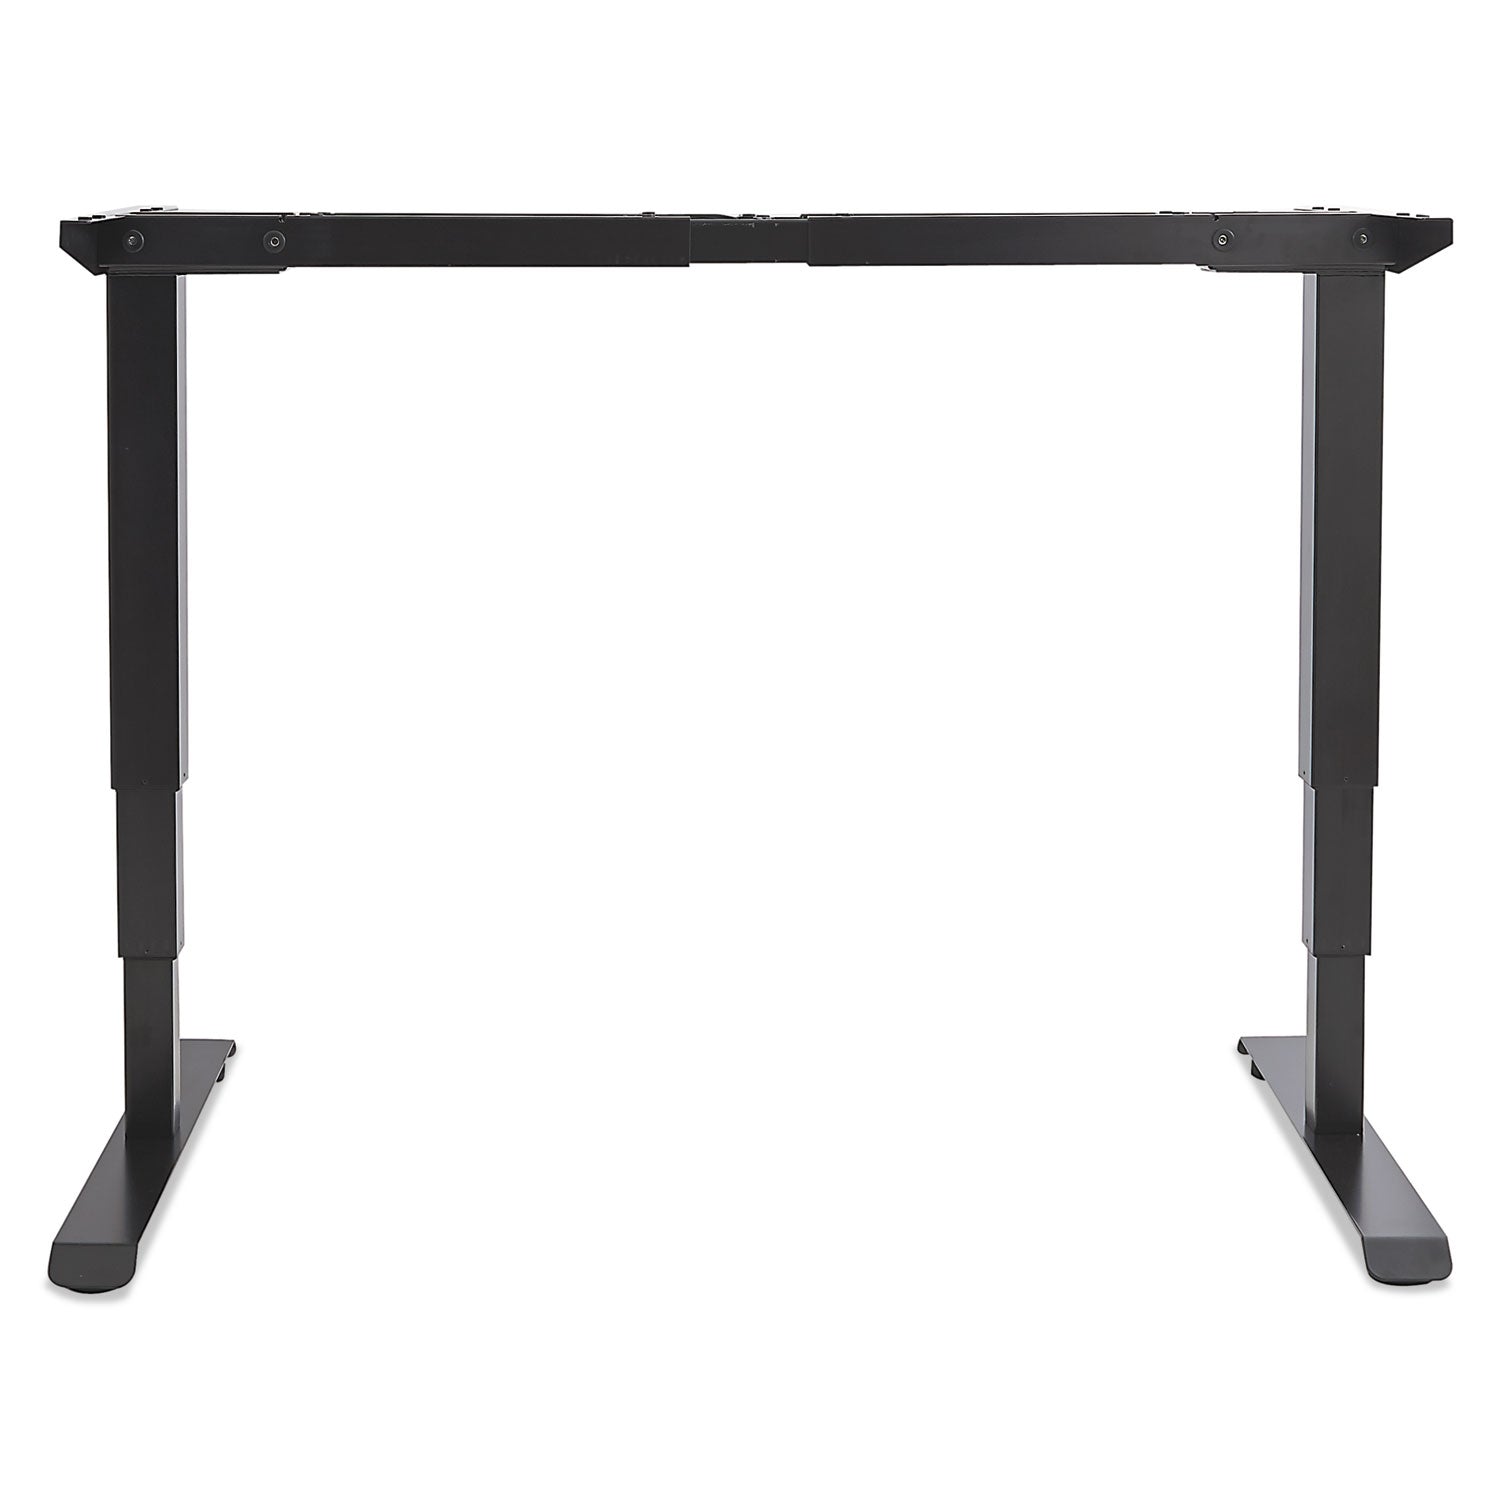 adaptivergo-sit-stand-3-stage-electric-height-adjustable-table-base-with-memory-control-4806-x-2435-x-25-to-507black_aleht3sab - 7